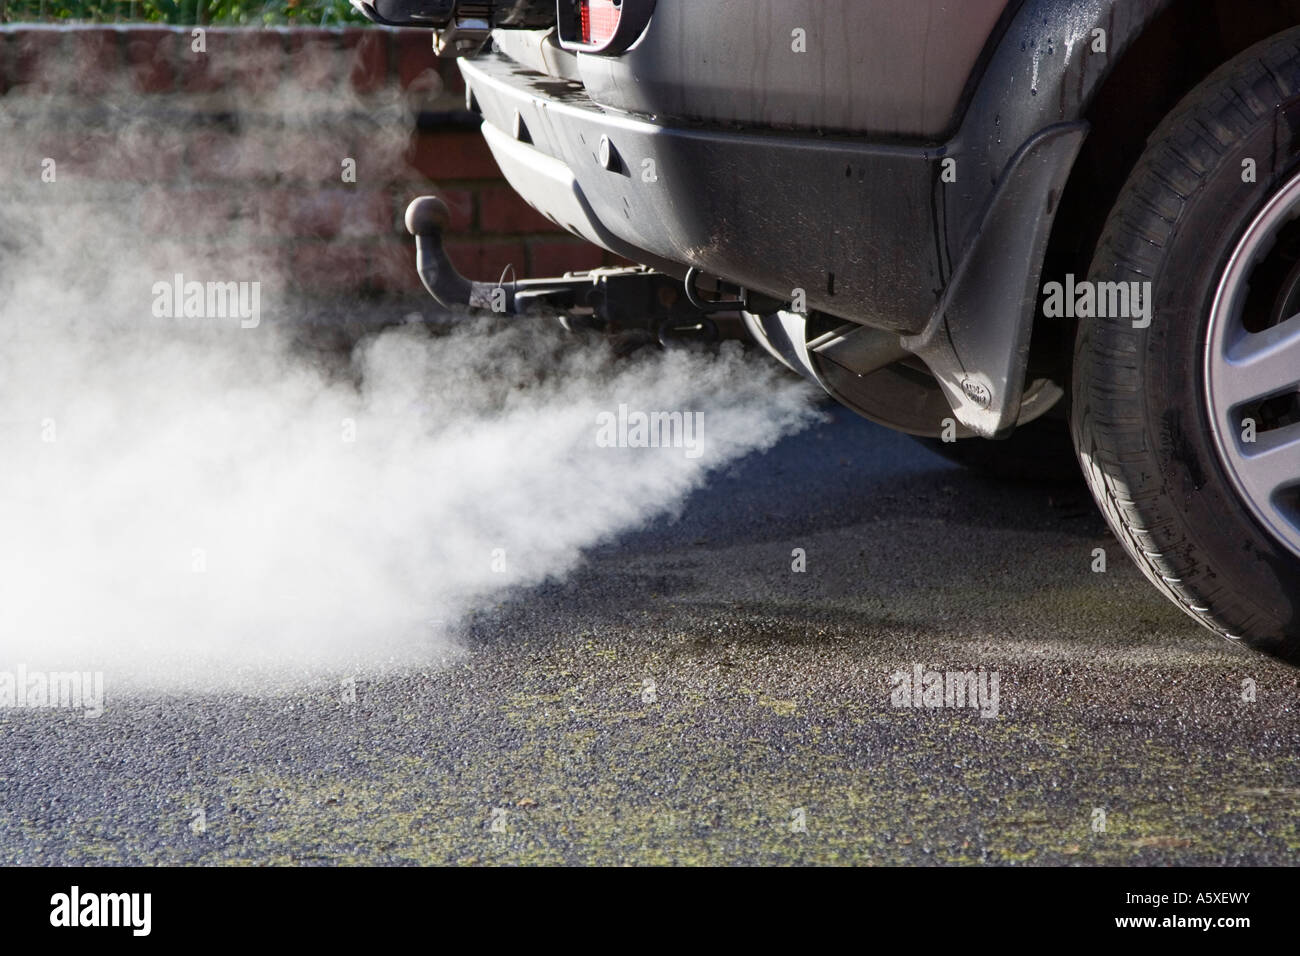 Exhaust cloud from a car. Engine revving. UK. Pollution and fumes from a vehicle. Stock Photo